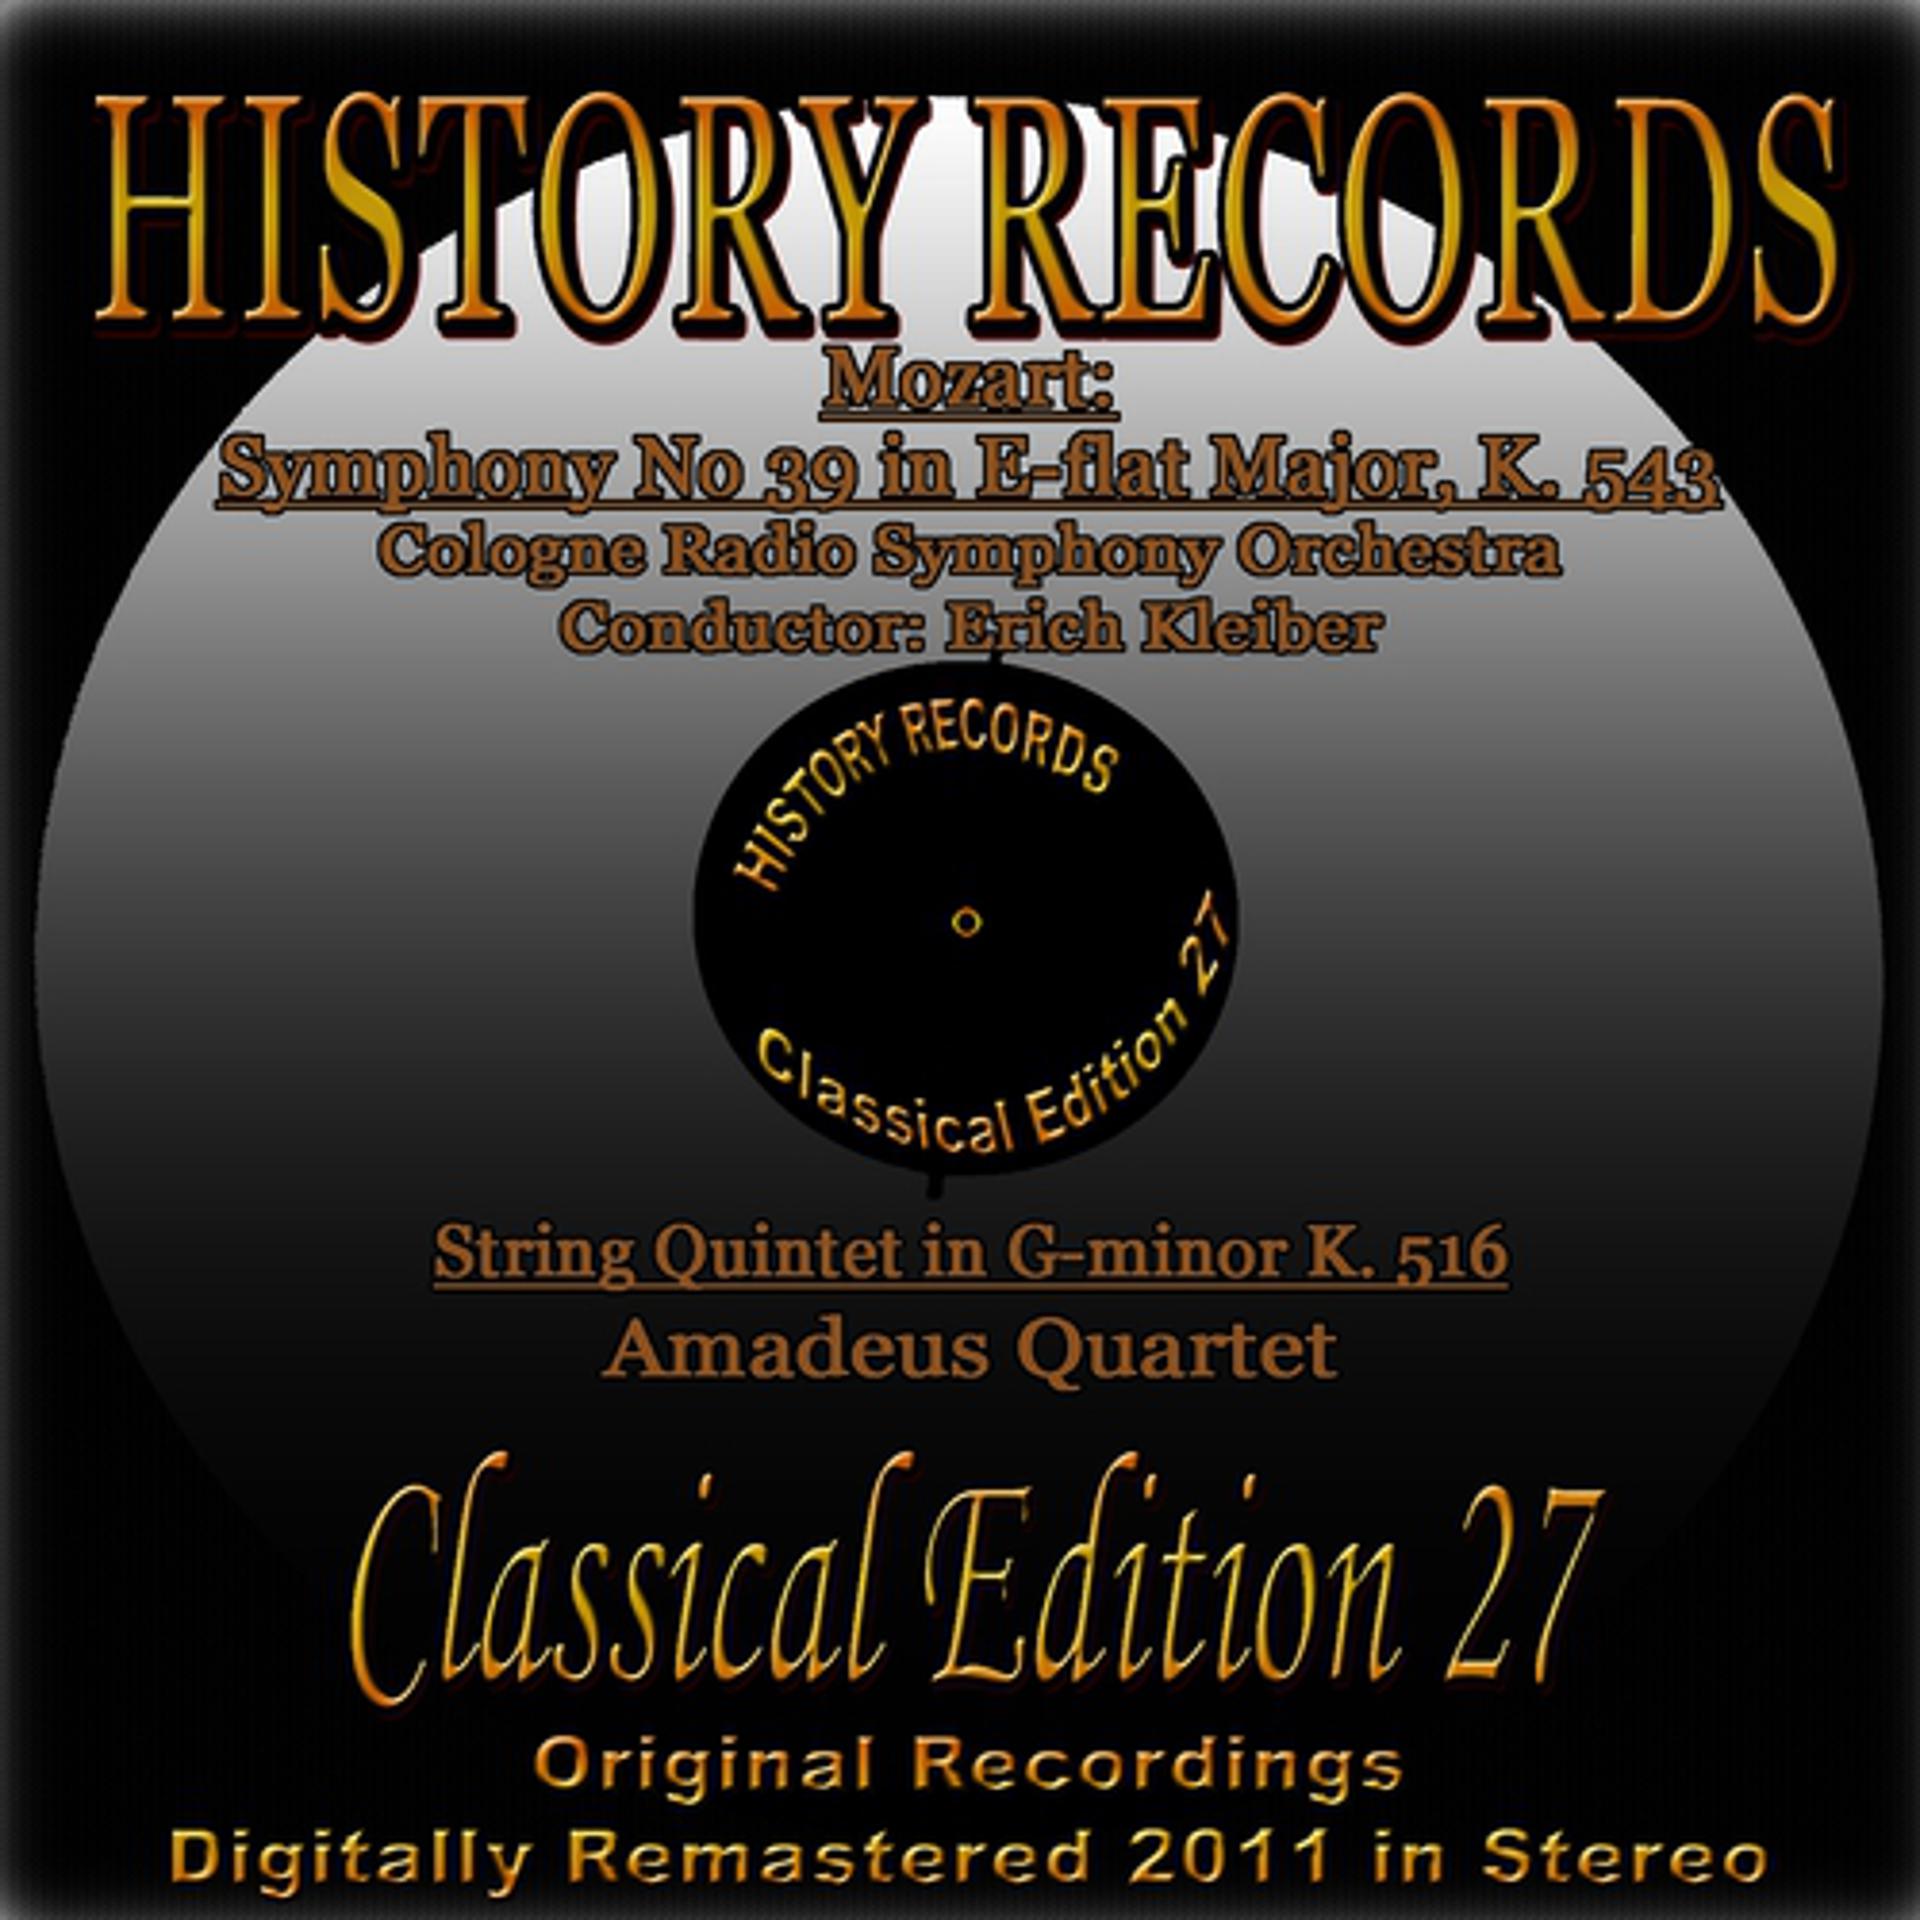 Постер альбома Mozart: Symphony No. 39 in E-Flat Major, K. 543 & String Quintet in G Minor K. 516 (History Records - Classical Edition 27 - Original Recordings Digitally Remastered 2011 in Stereo)